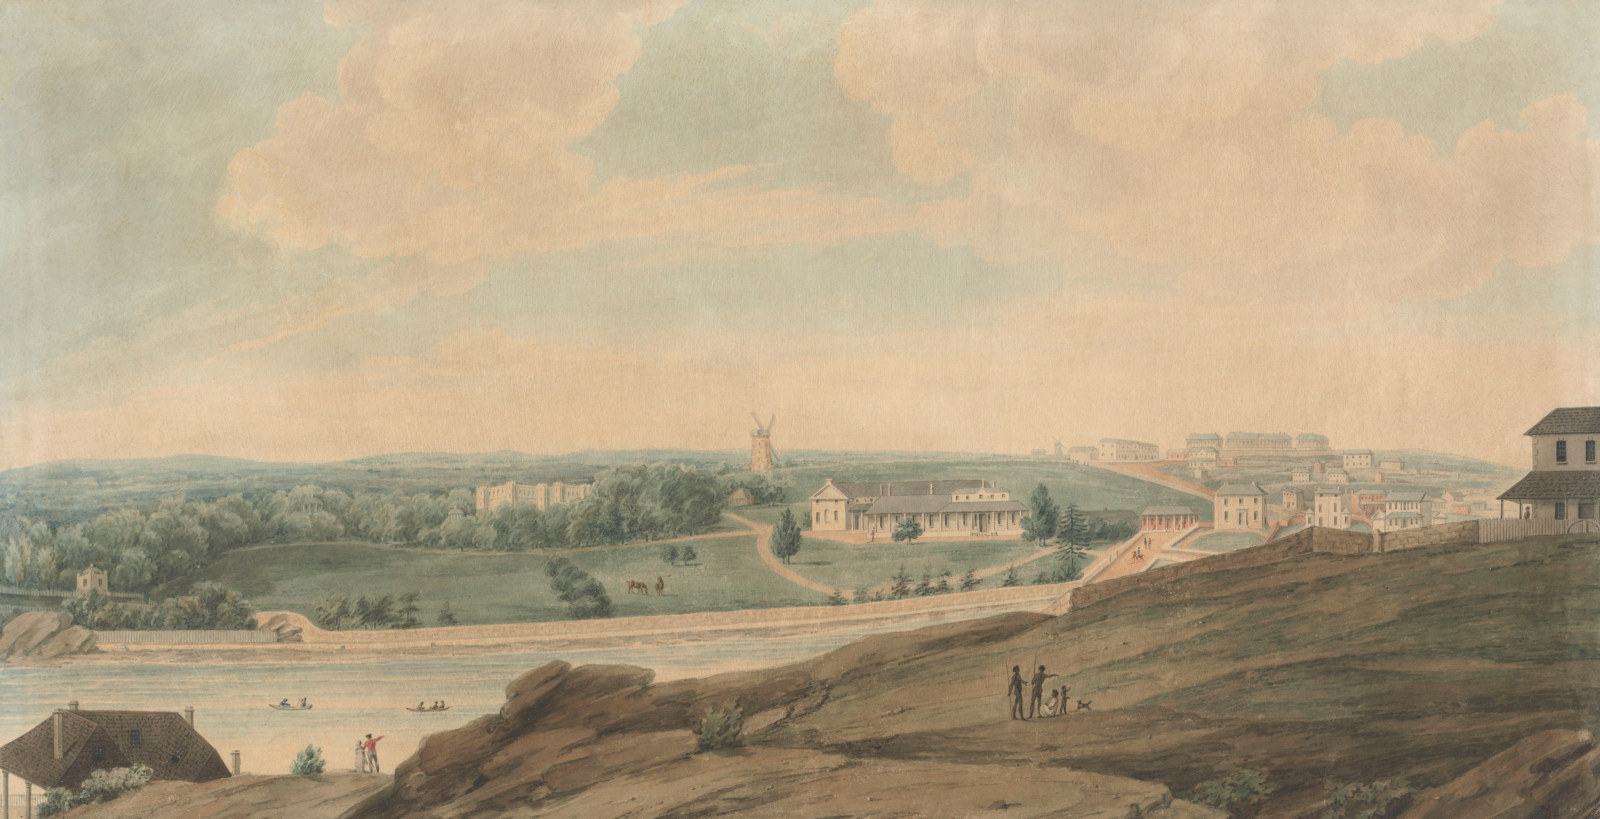 View of Government domain & part of Sydney, taken from Bunkers Hill, N.S.Wales